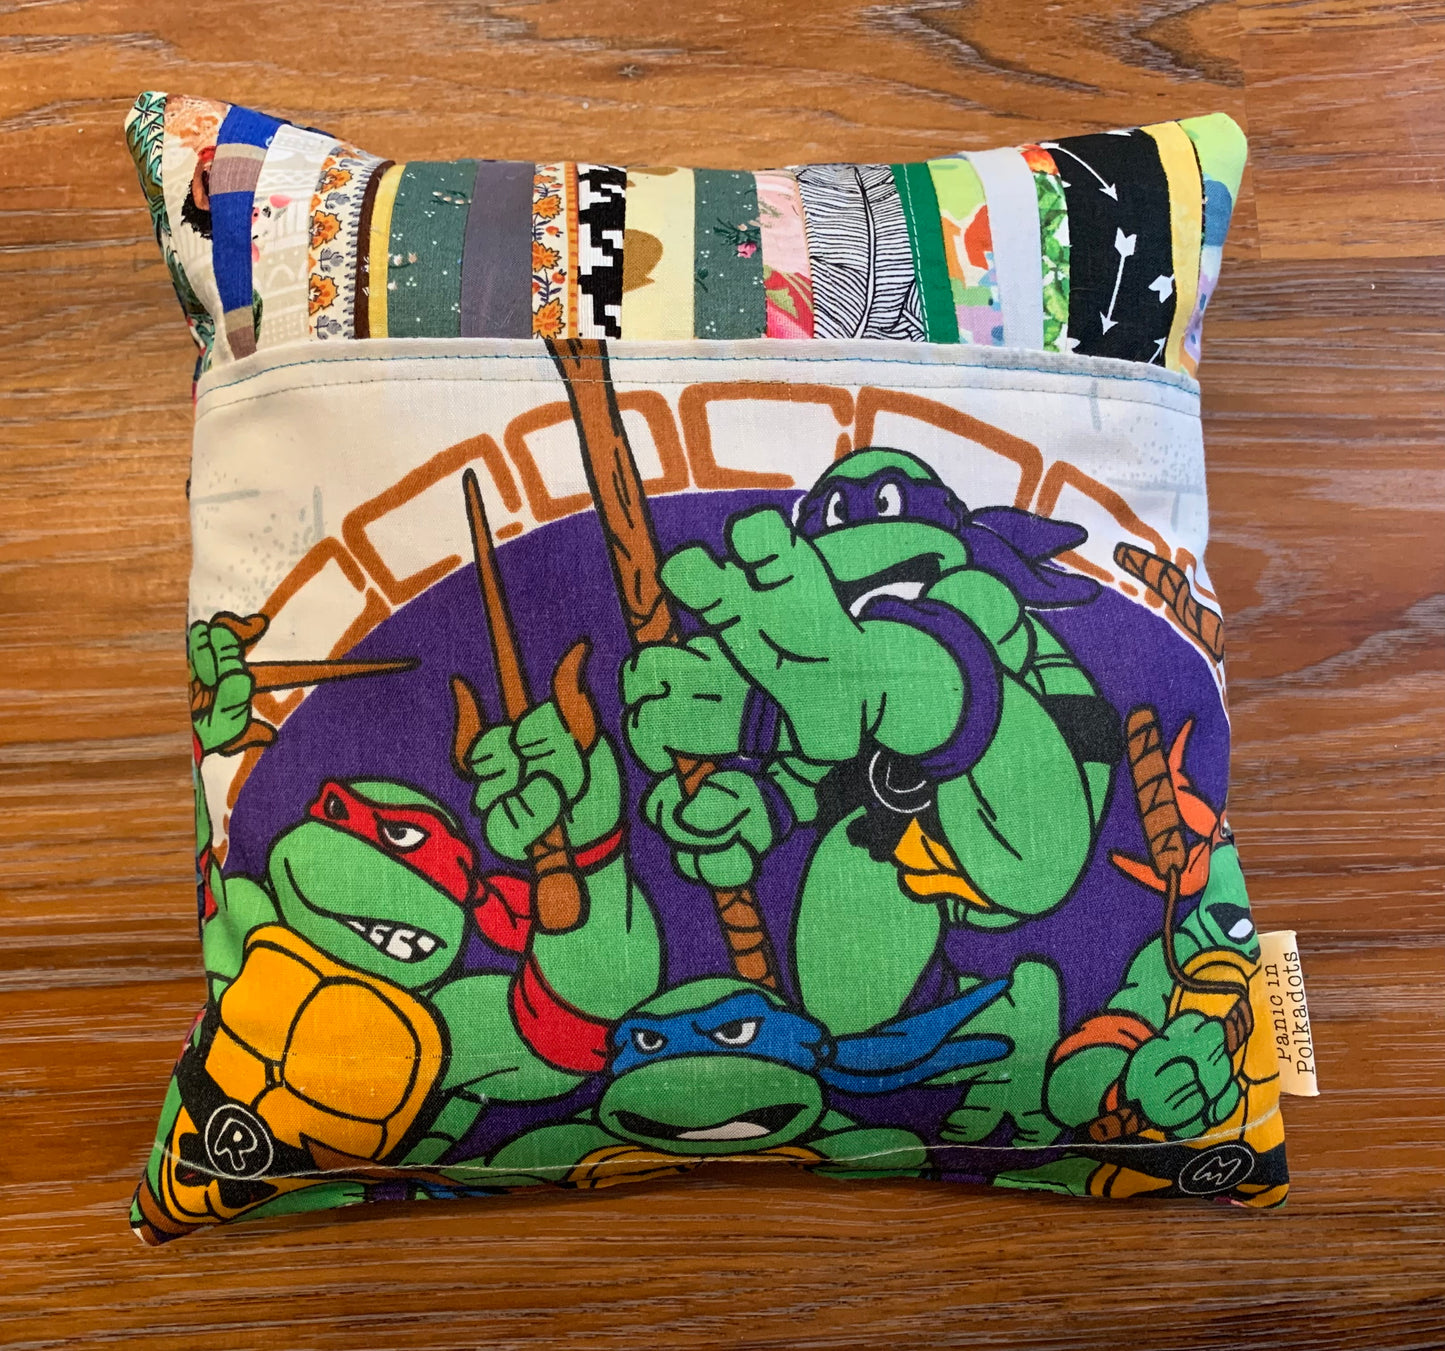 Little Pillow - Tooth Fairy Pocket - Lilo and Stitch, Pineapple, 2 or 3, Little Mermaid, TMNT